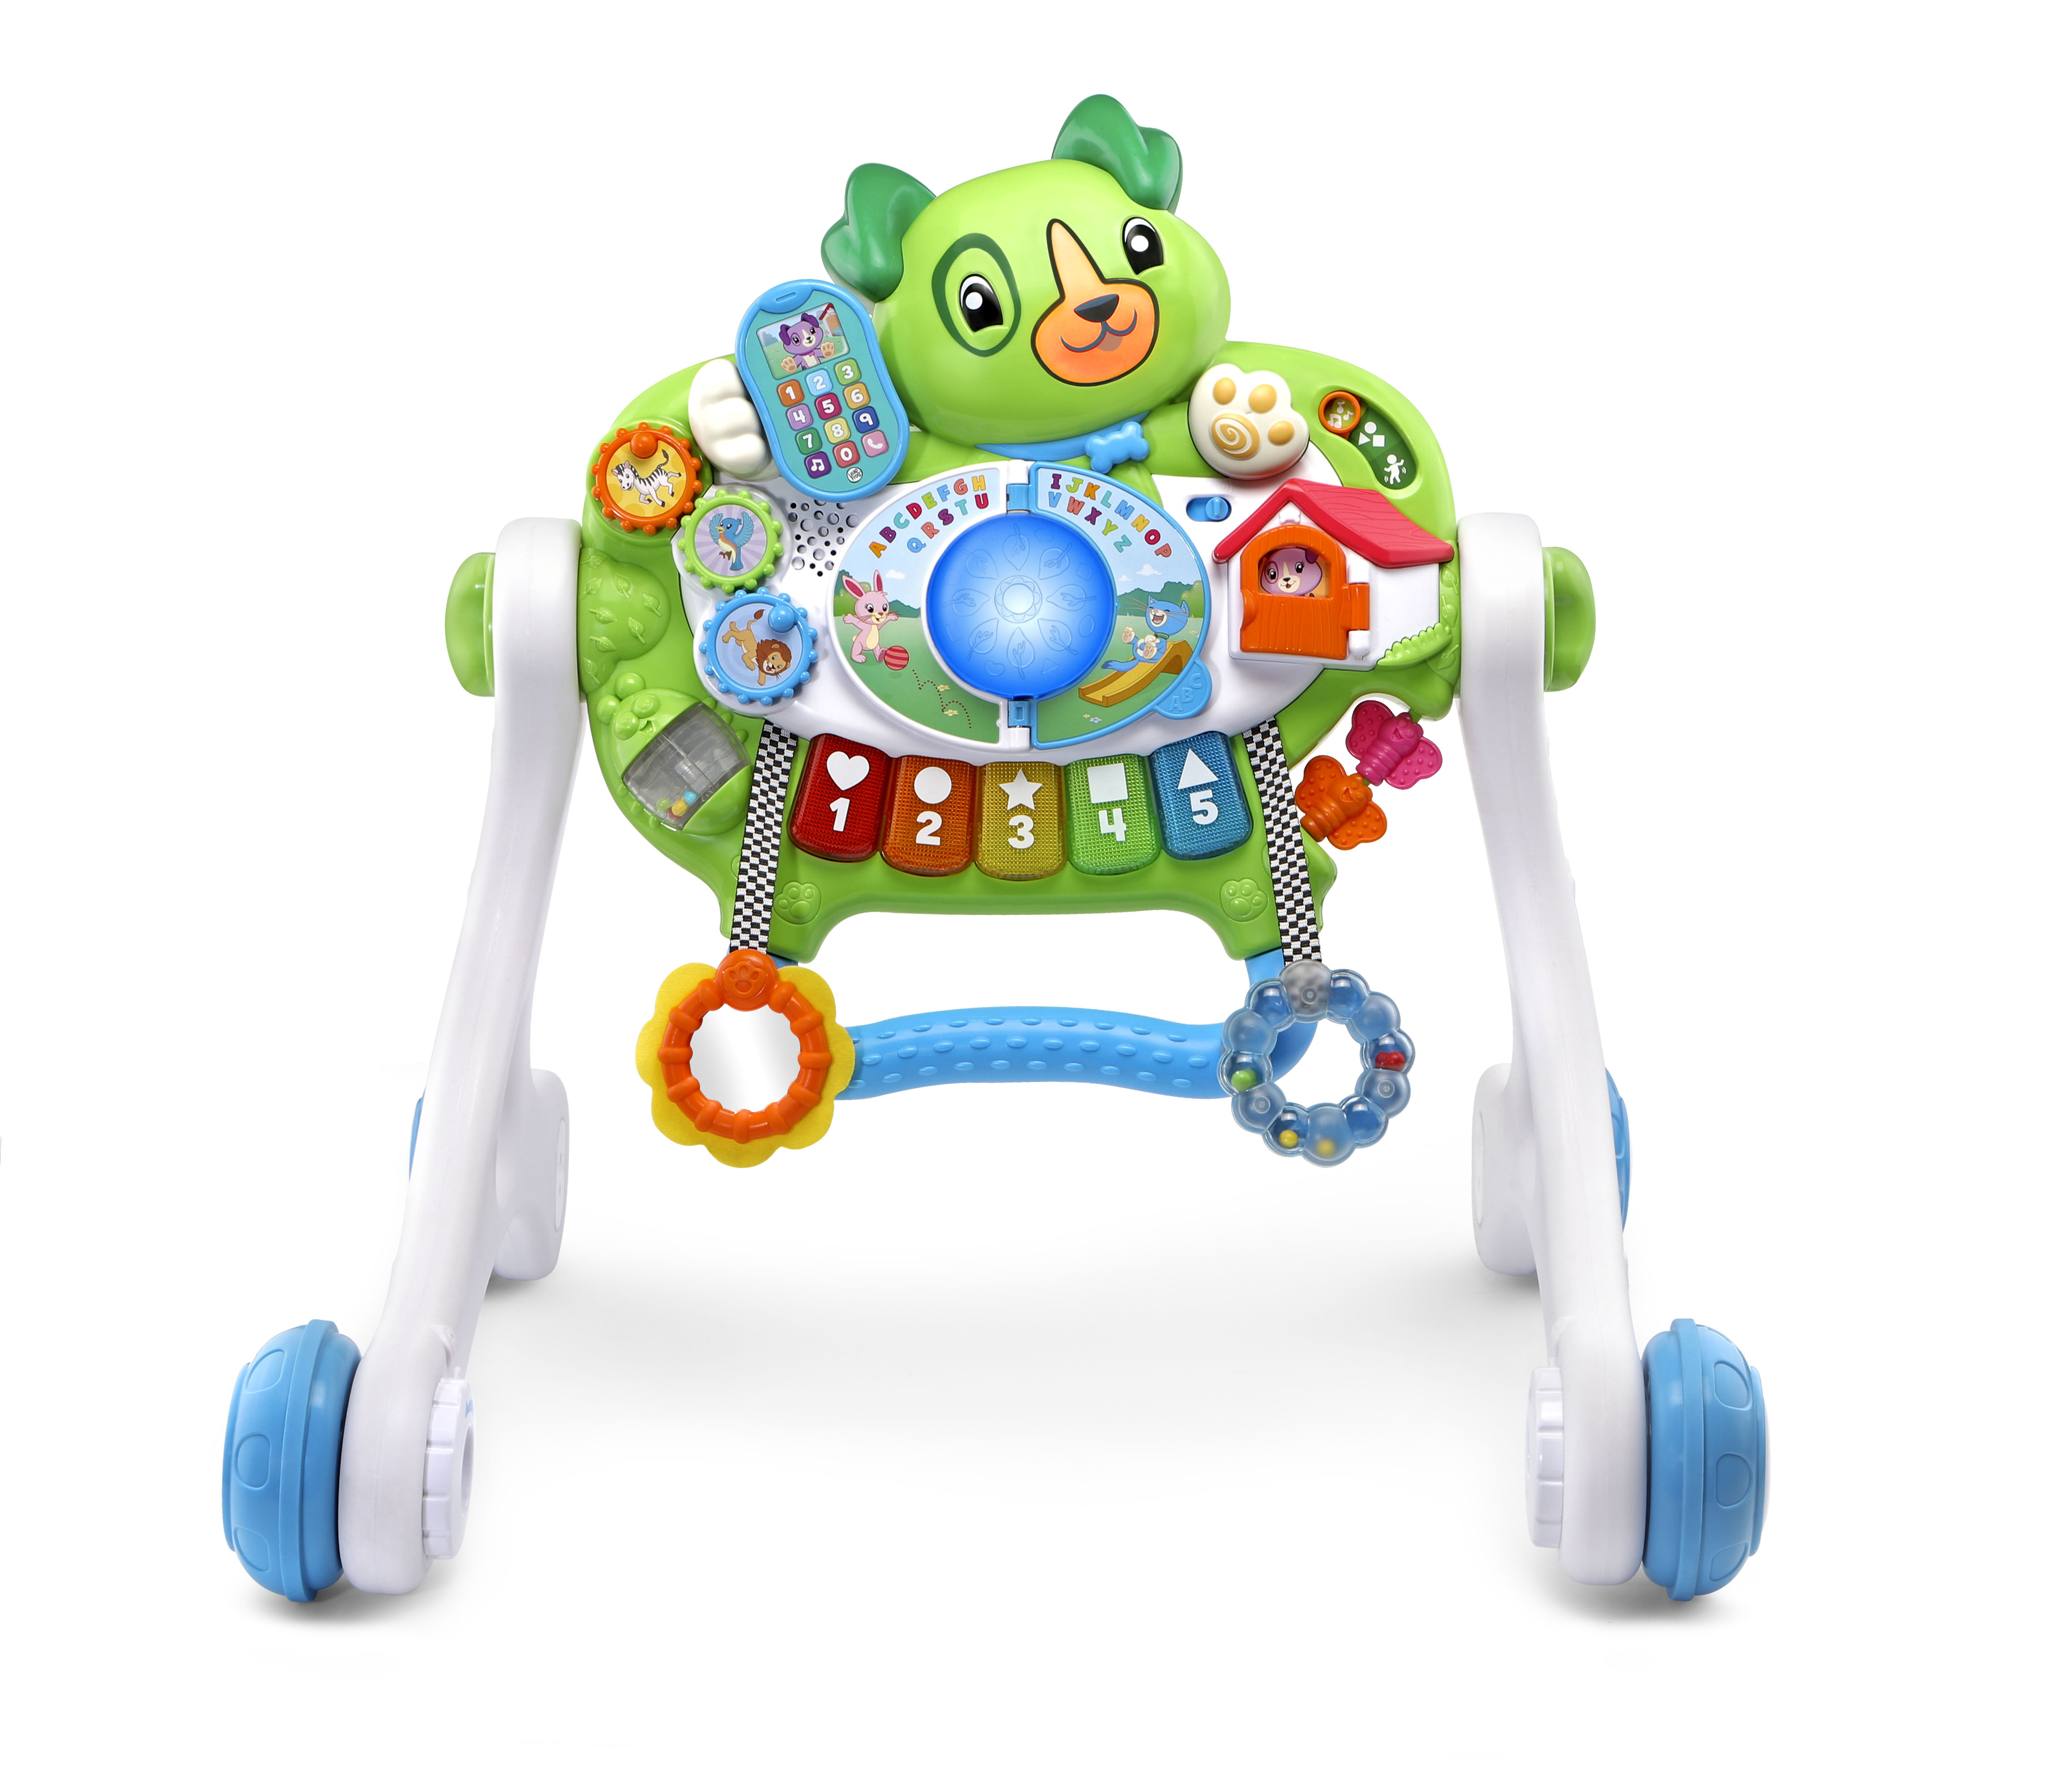 Scout's 3-in-1 Get Up and Go Walker, Baby Gym, Floor Play Toy, Green - image 5 of 11